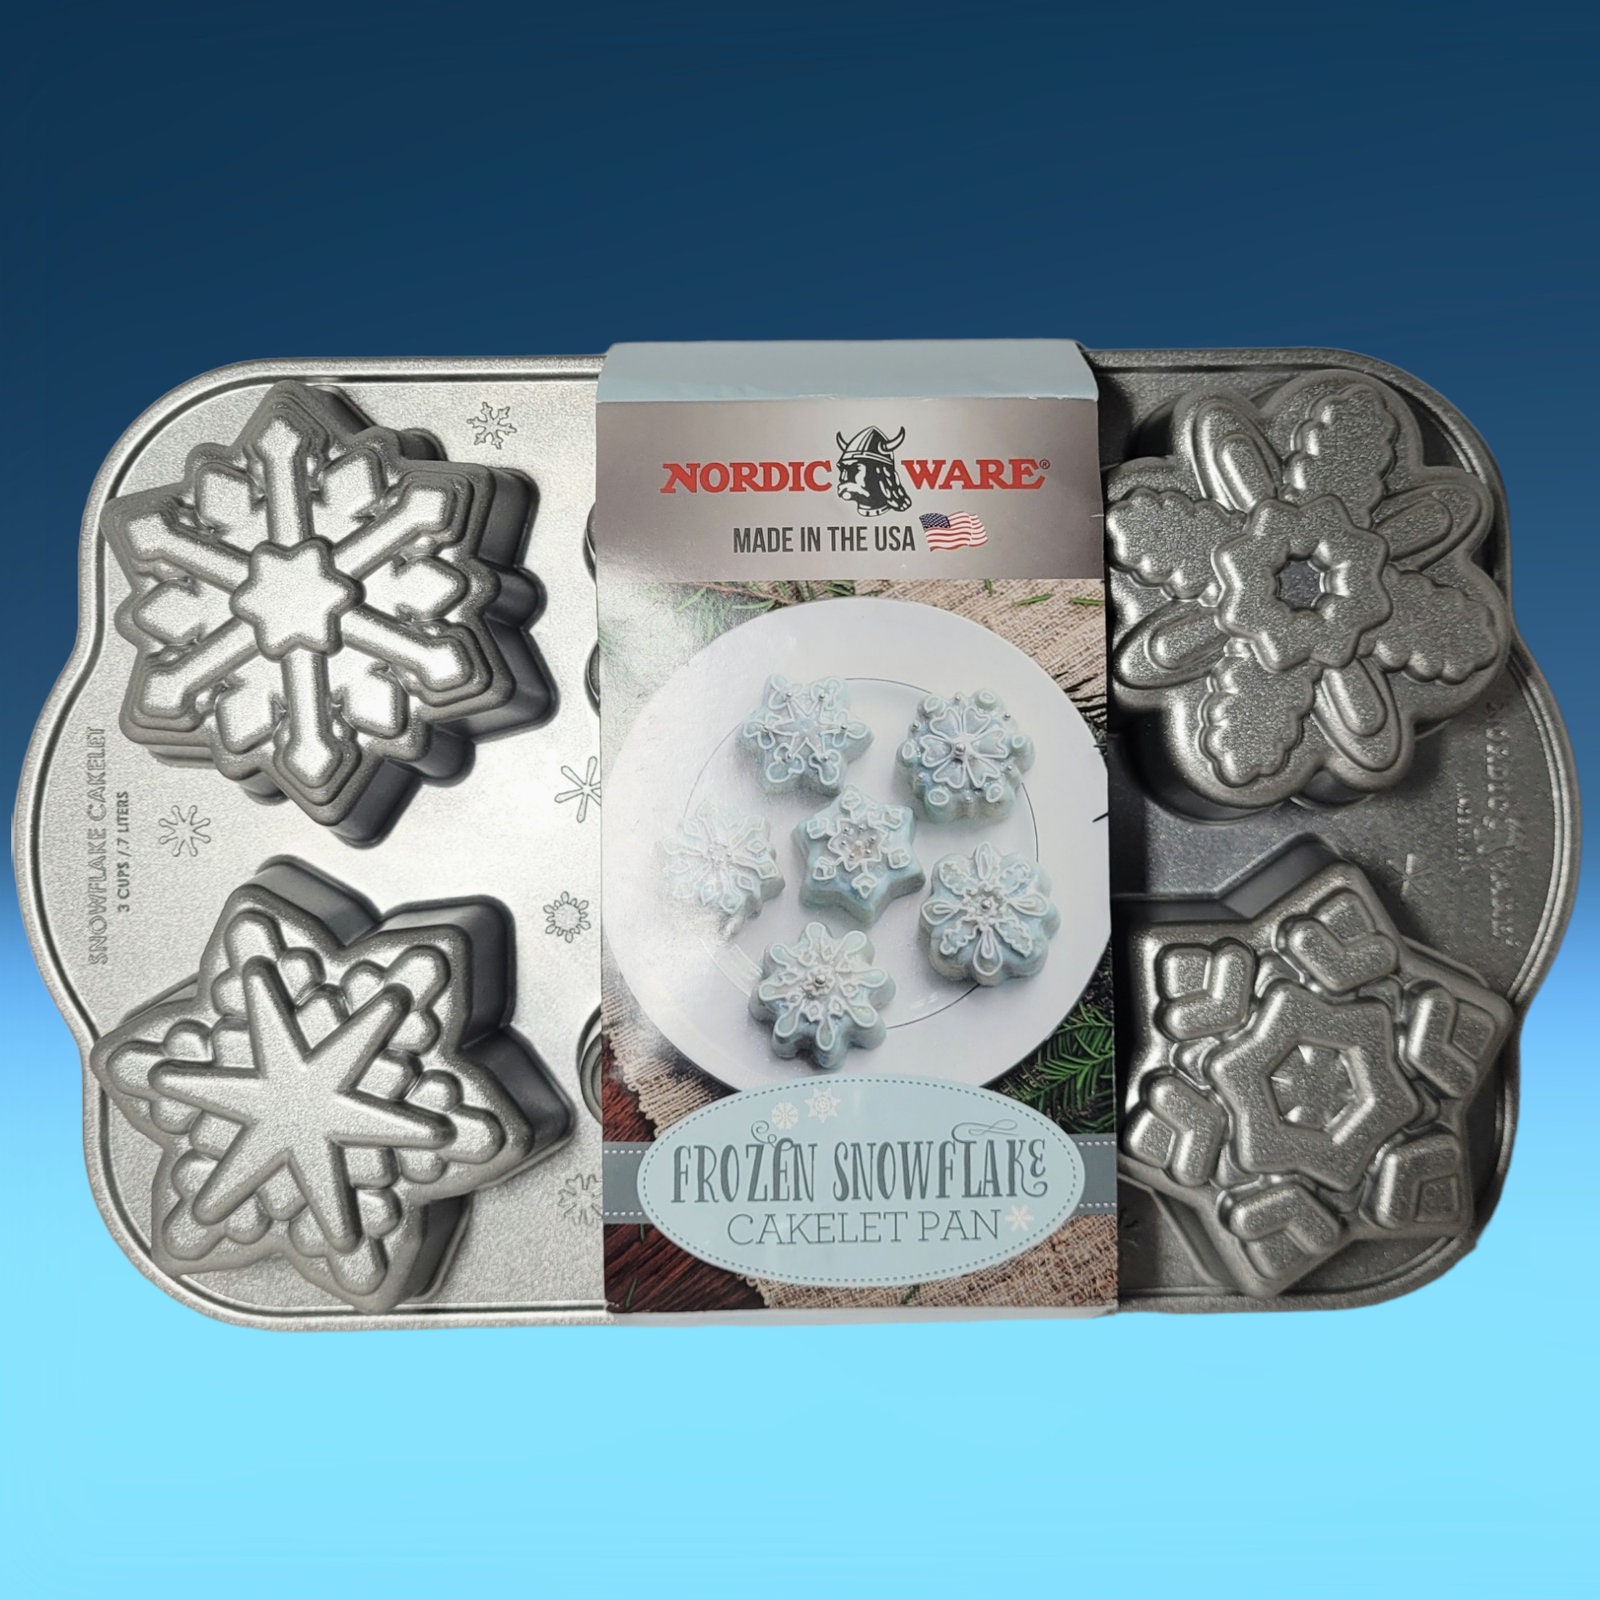 Vintage William-Sonoma by Nordicware Snowflake Cake Pan New in package